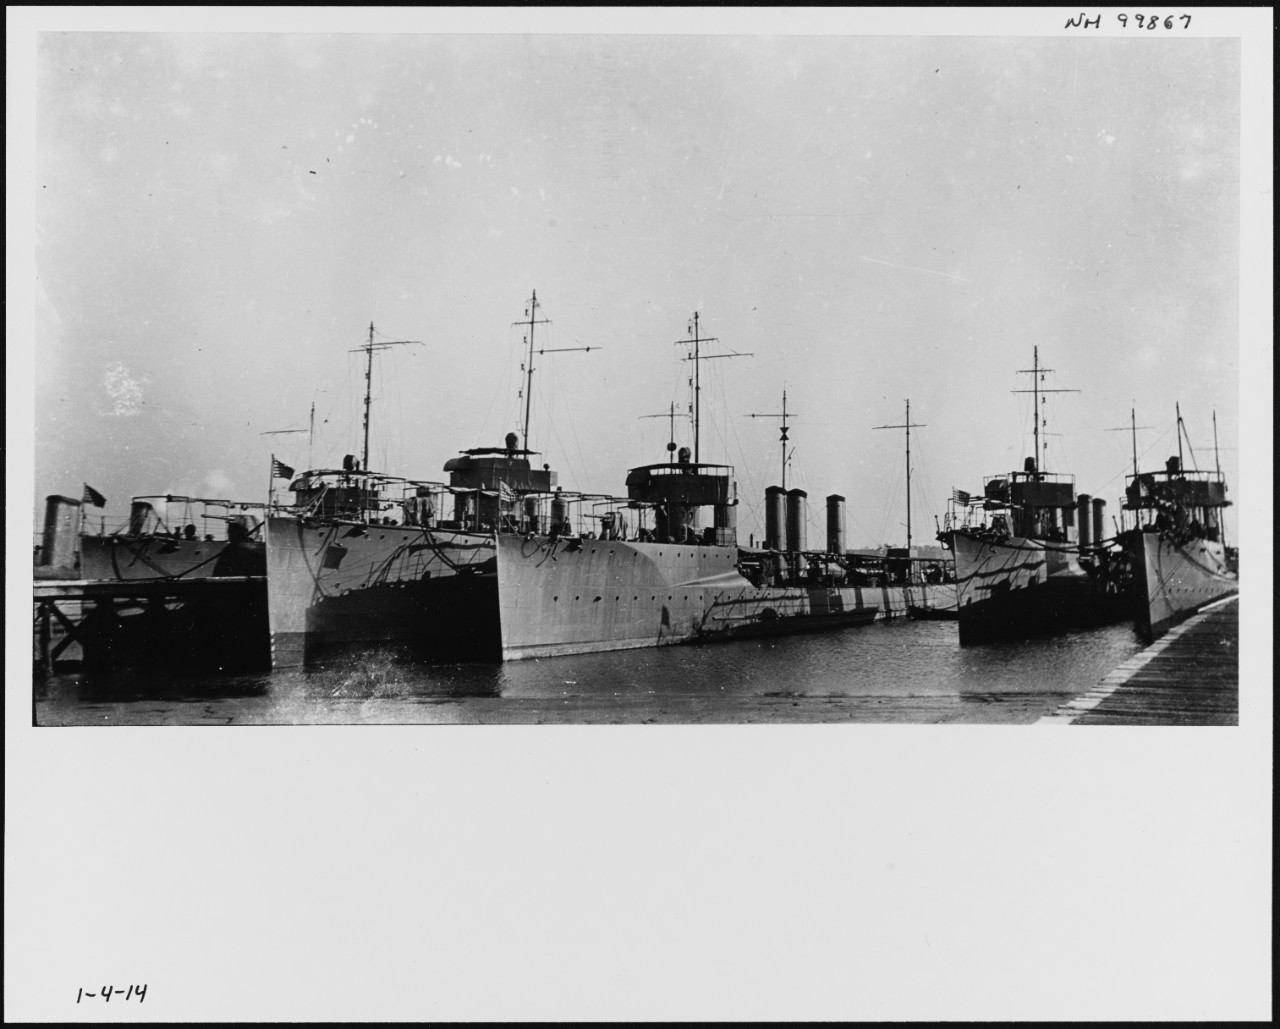 Photo #: NH 99867  Destroyers in port, 4 January 1914